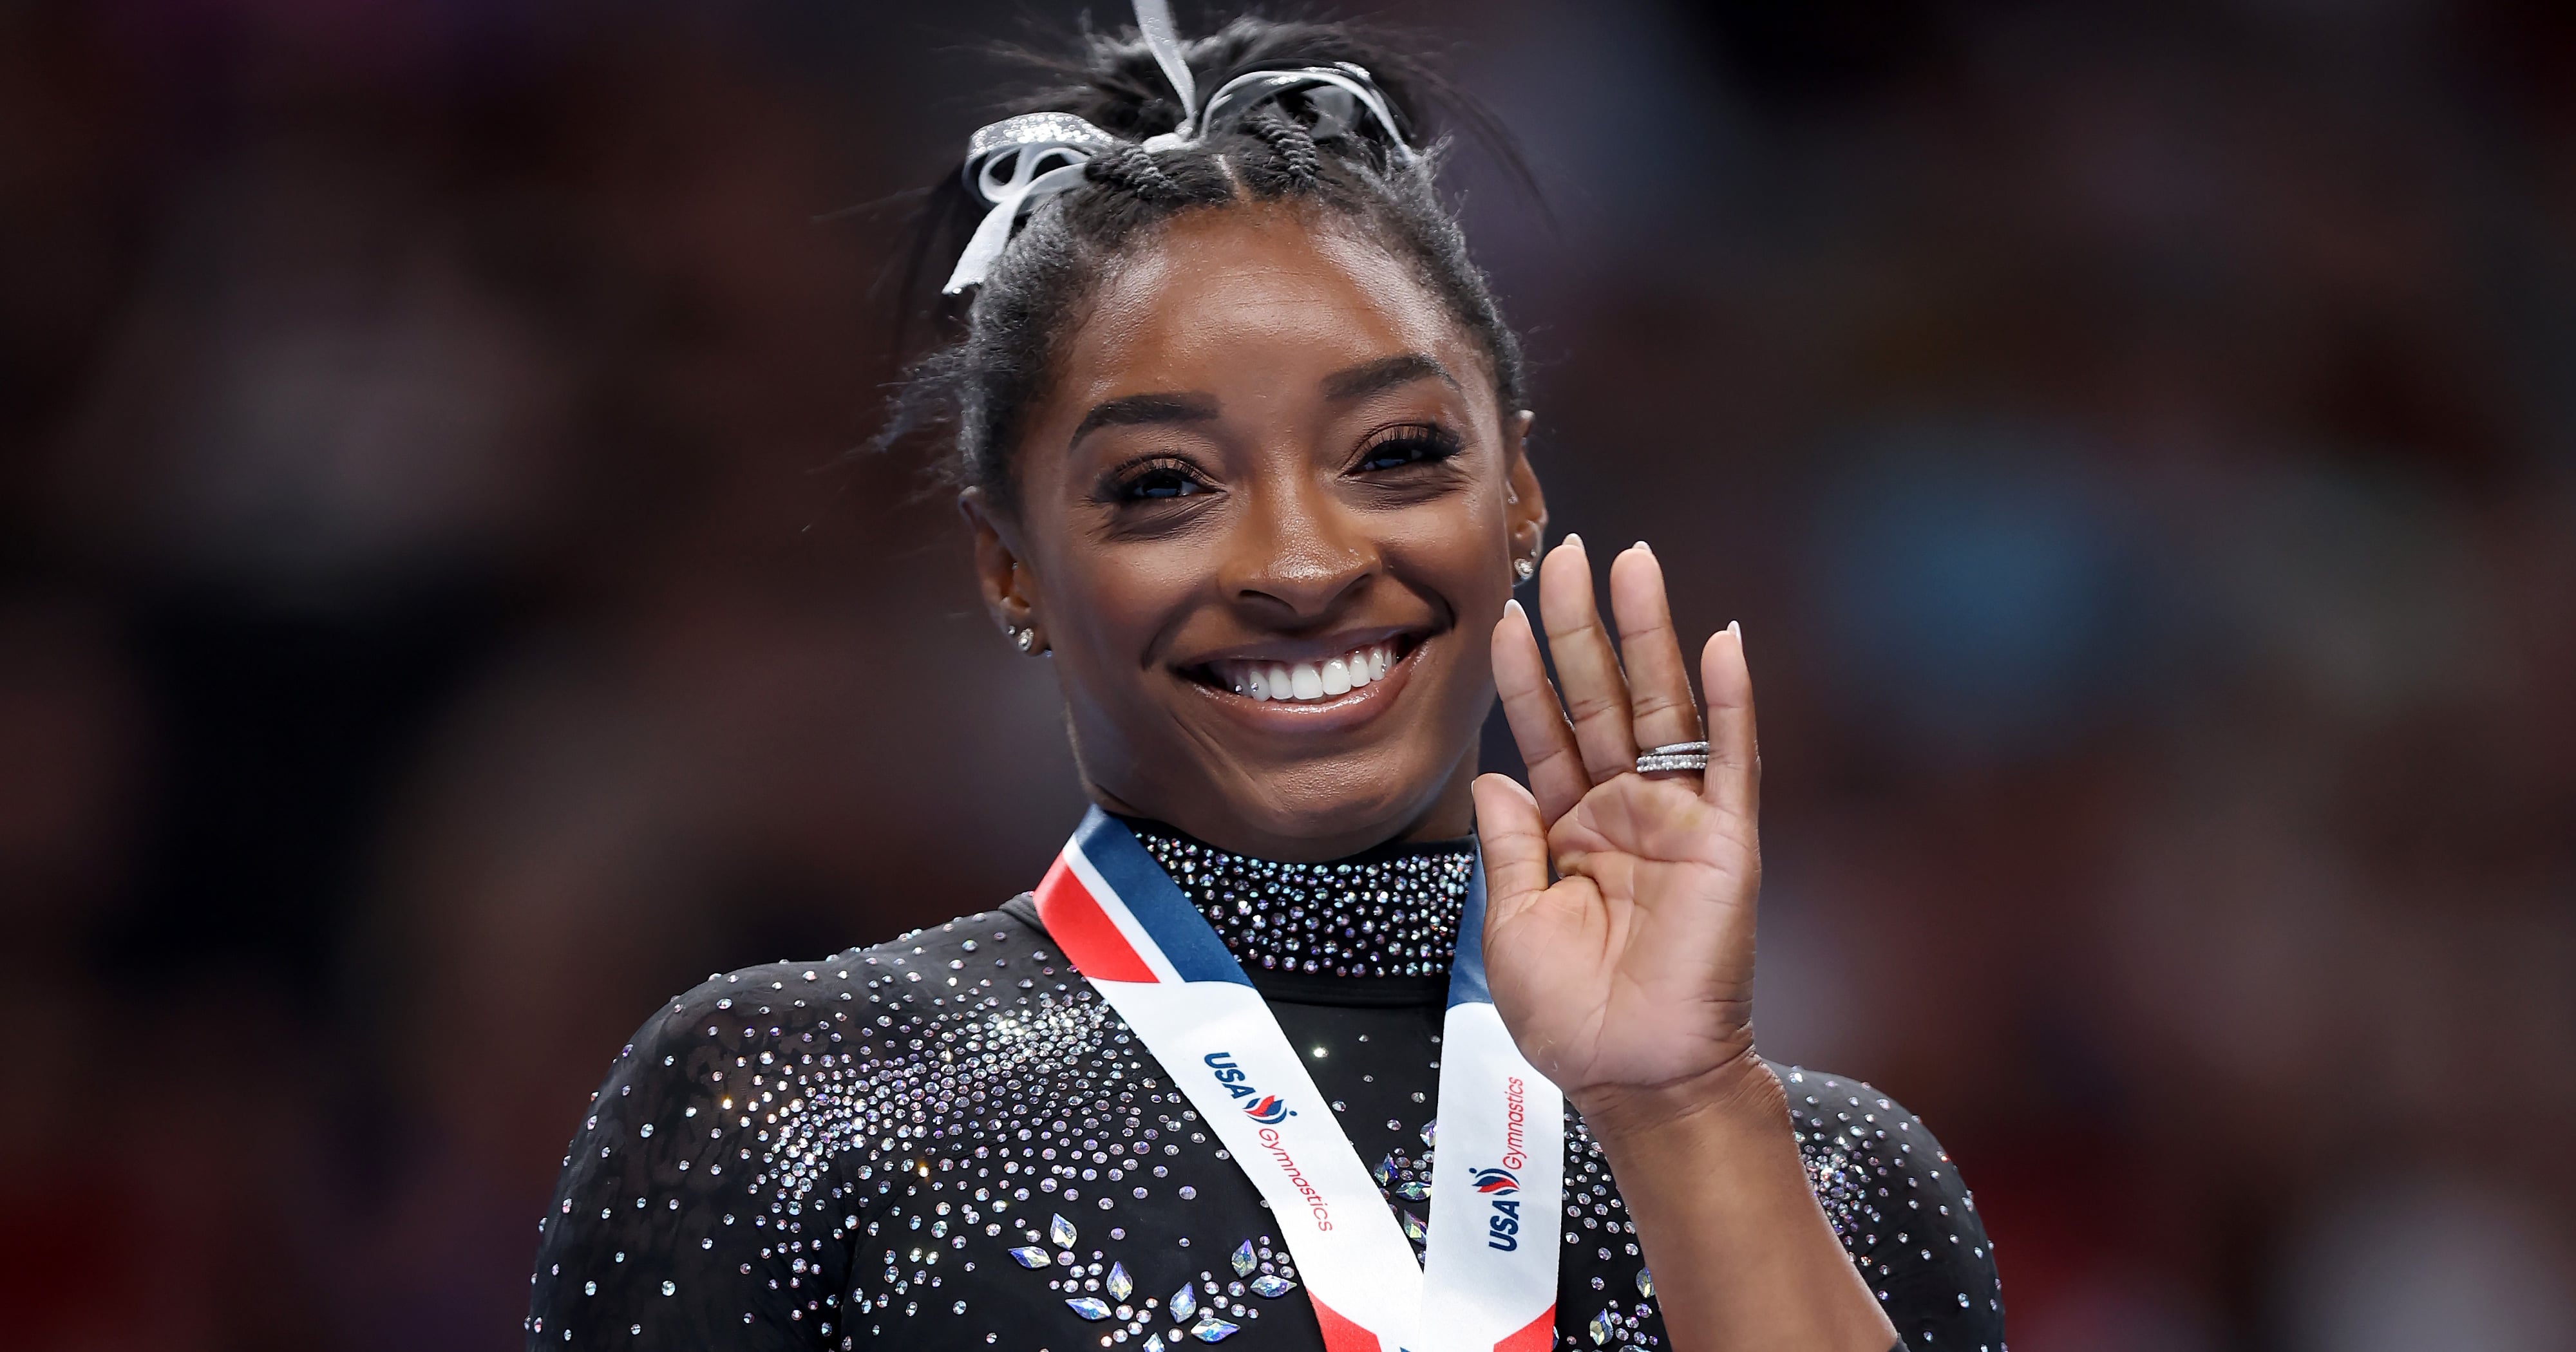 Simone Biles Has 6 Known Tattoos, Including 1 We’ll Never See